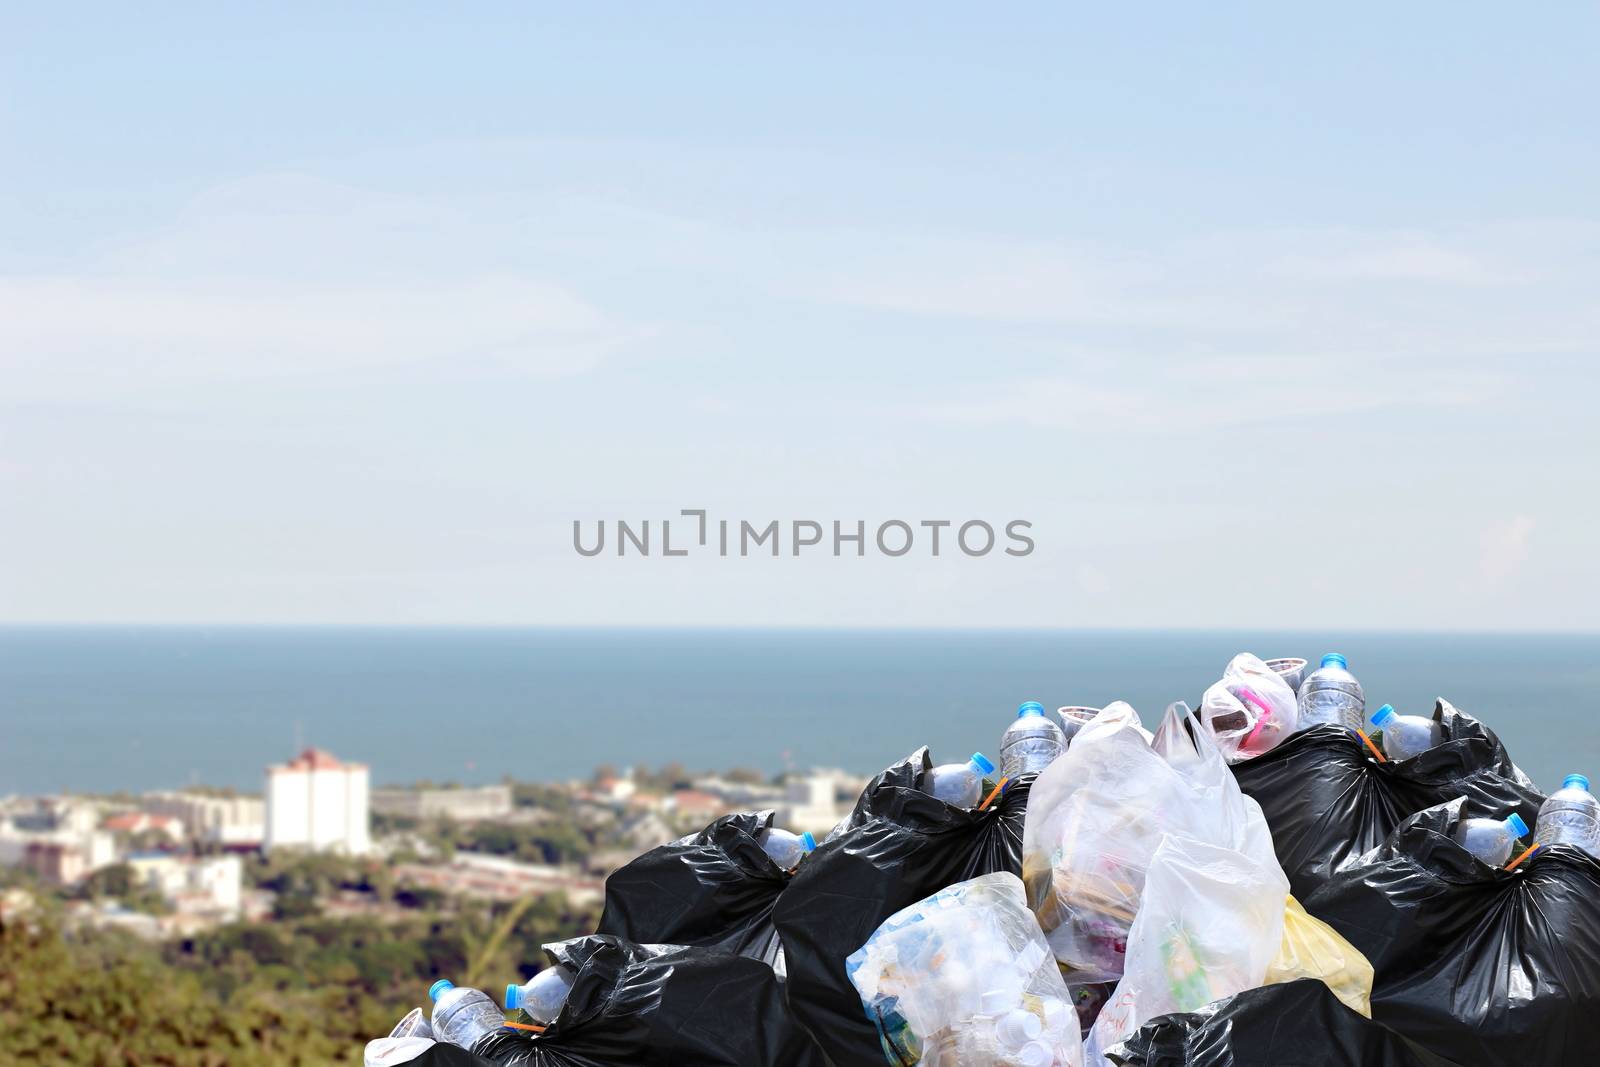 Lots waste plastic heap, Garbage heap, Waste plastic many, Pollution Garbage bin pile Dump Lots of junk Polluting at front City community and sea location landscape background by cgdeaw